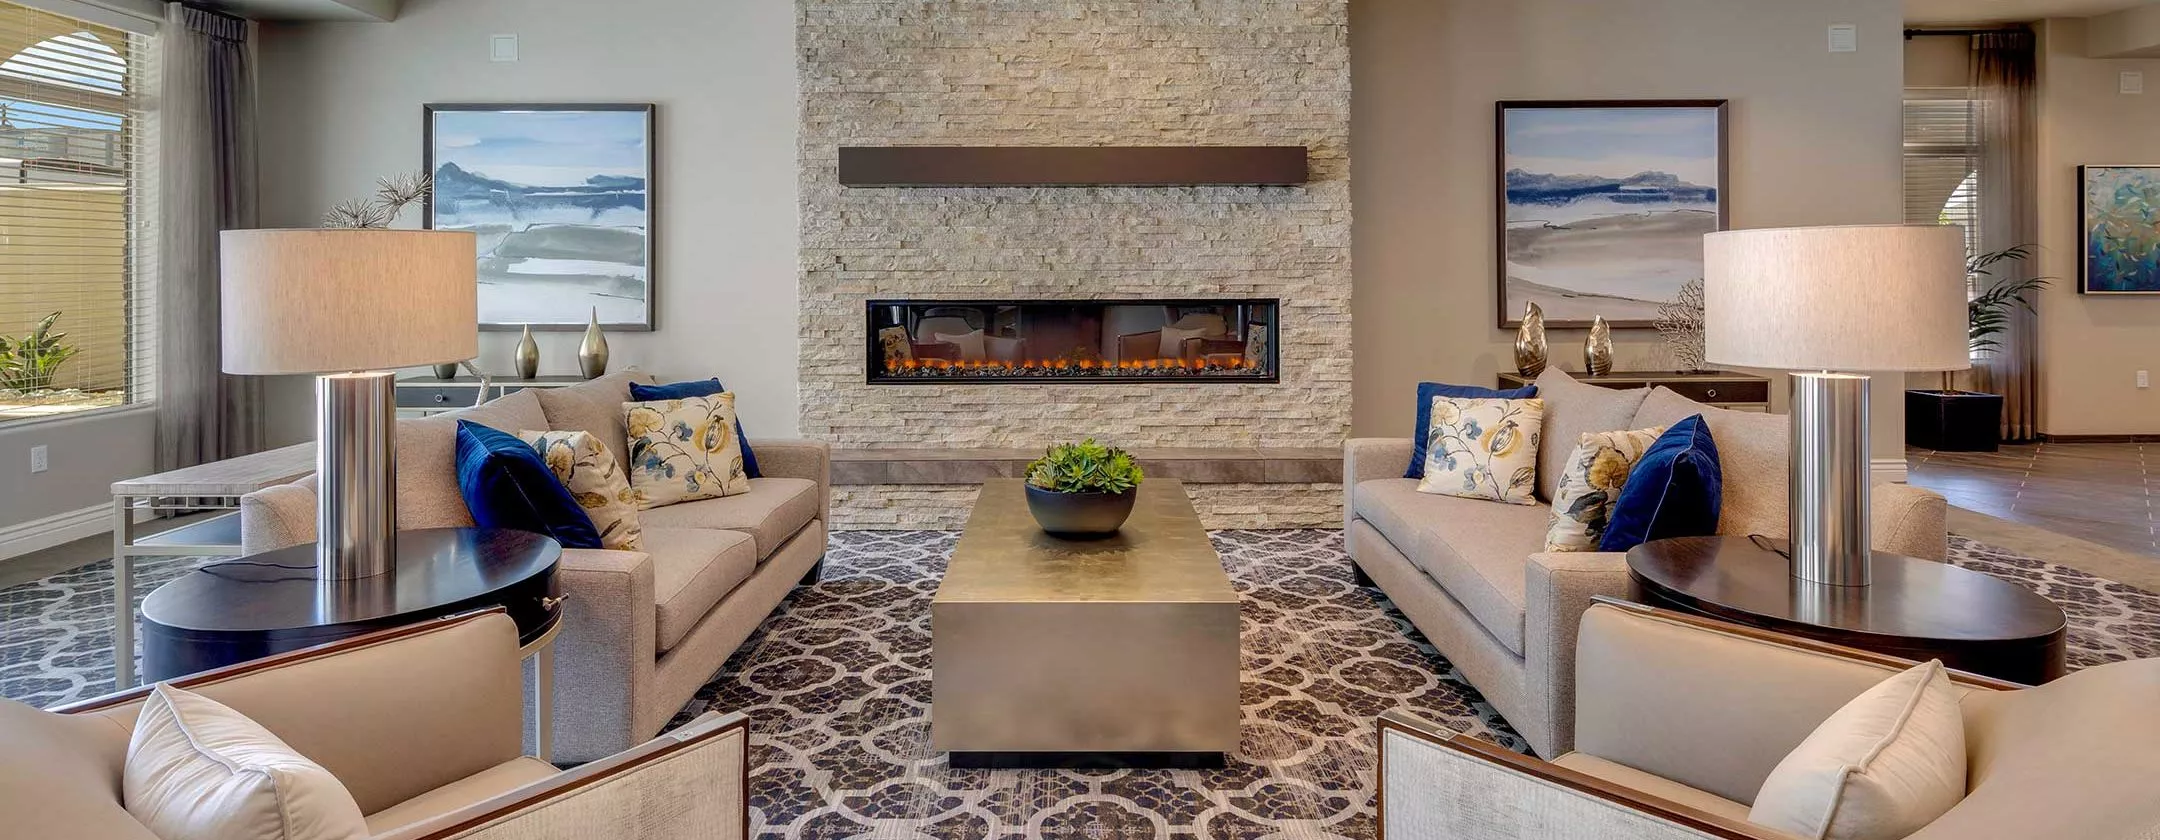 Huntington Beach lounge with fire place and sofas